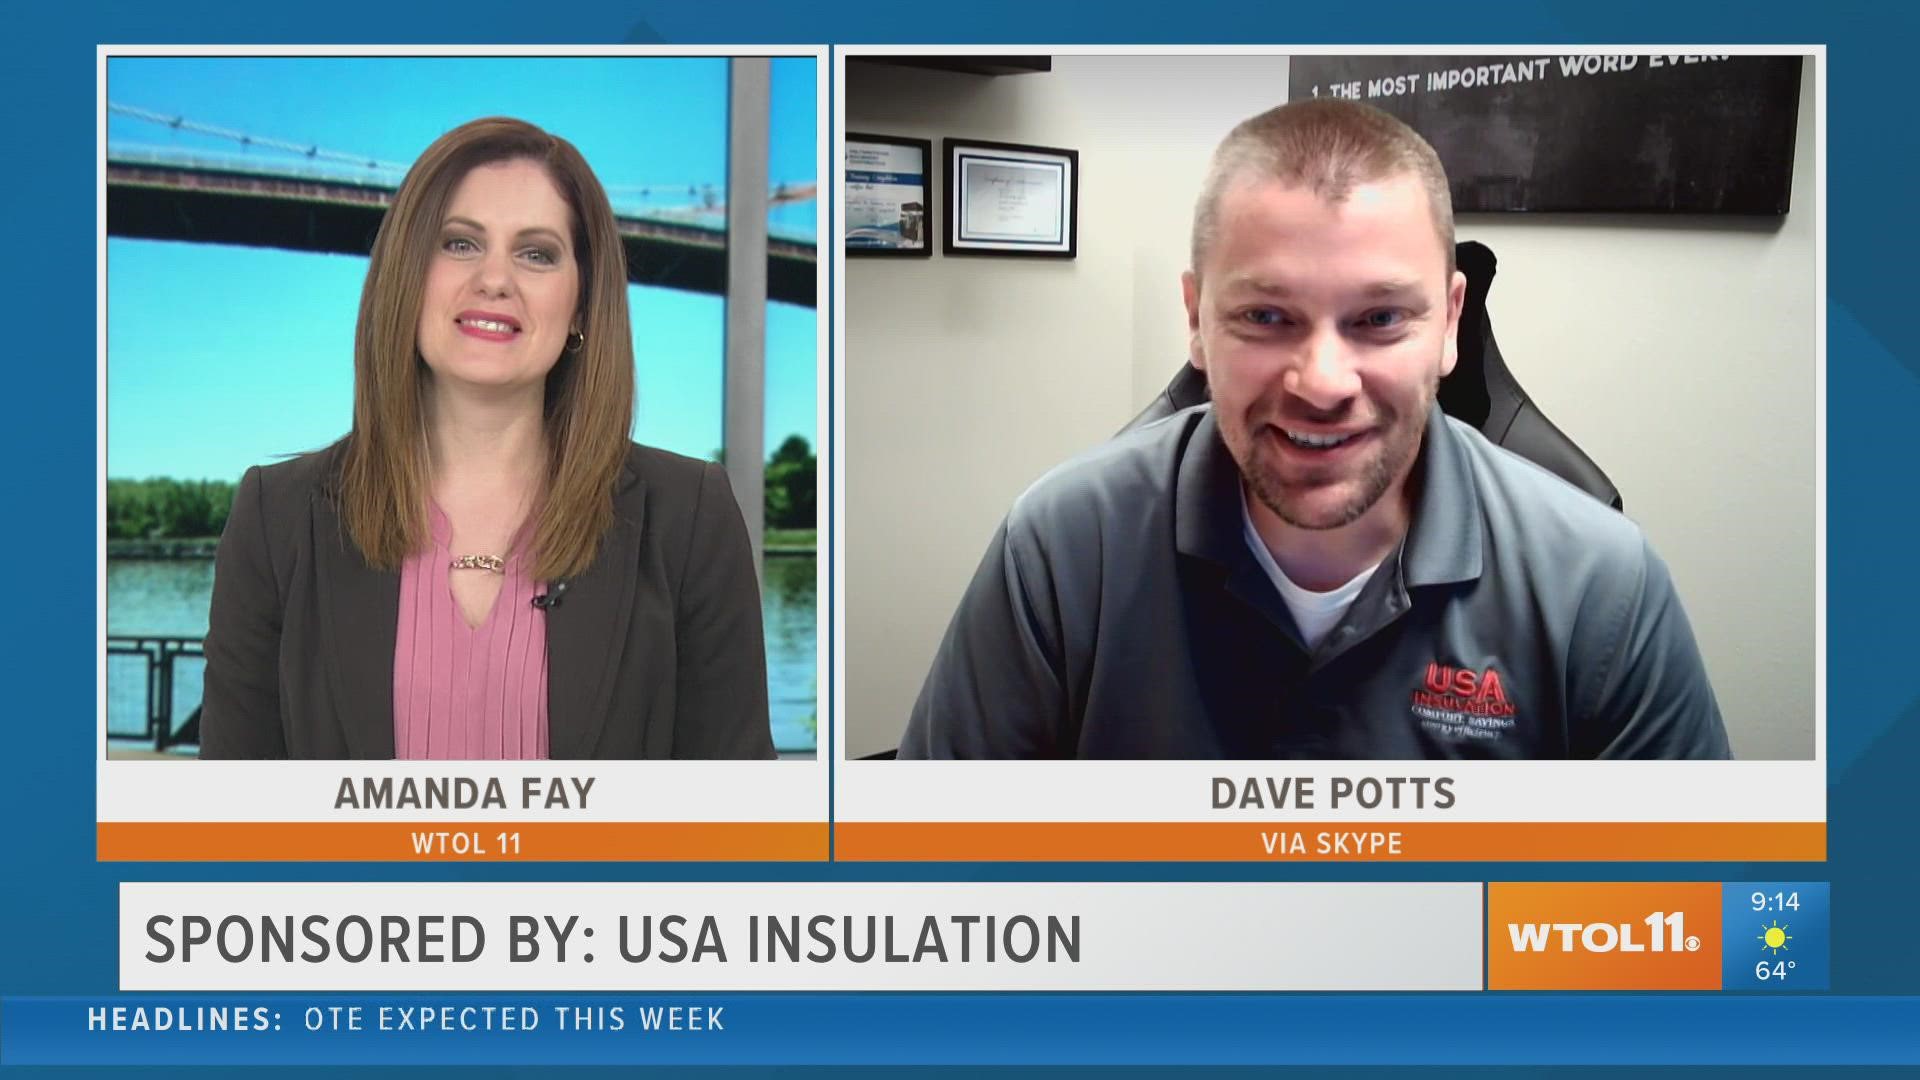 Don't wait until winter to insulate your home - let USA Insulation help you out now so you don't pay for it later!